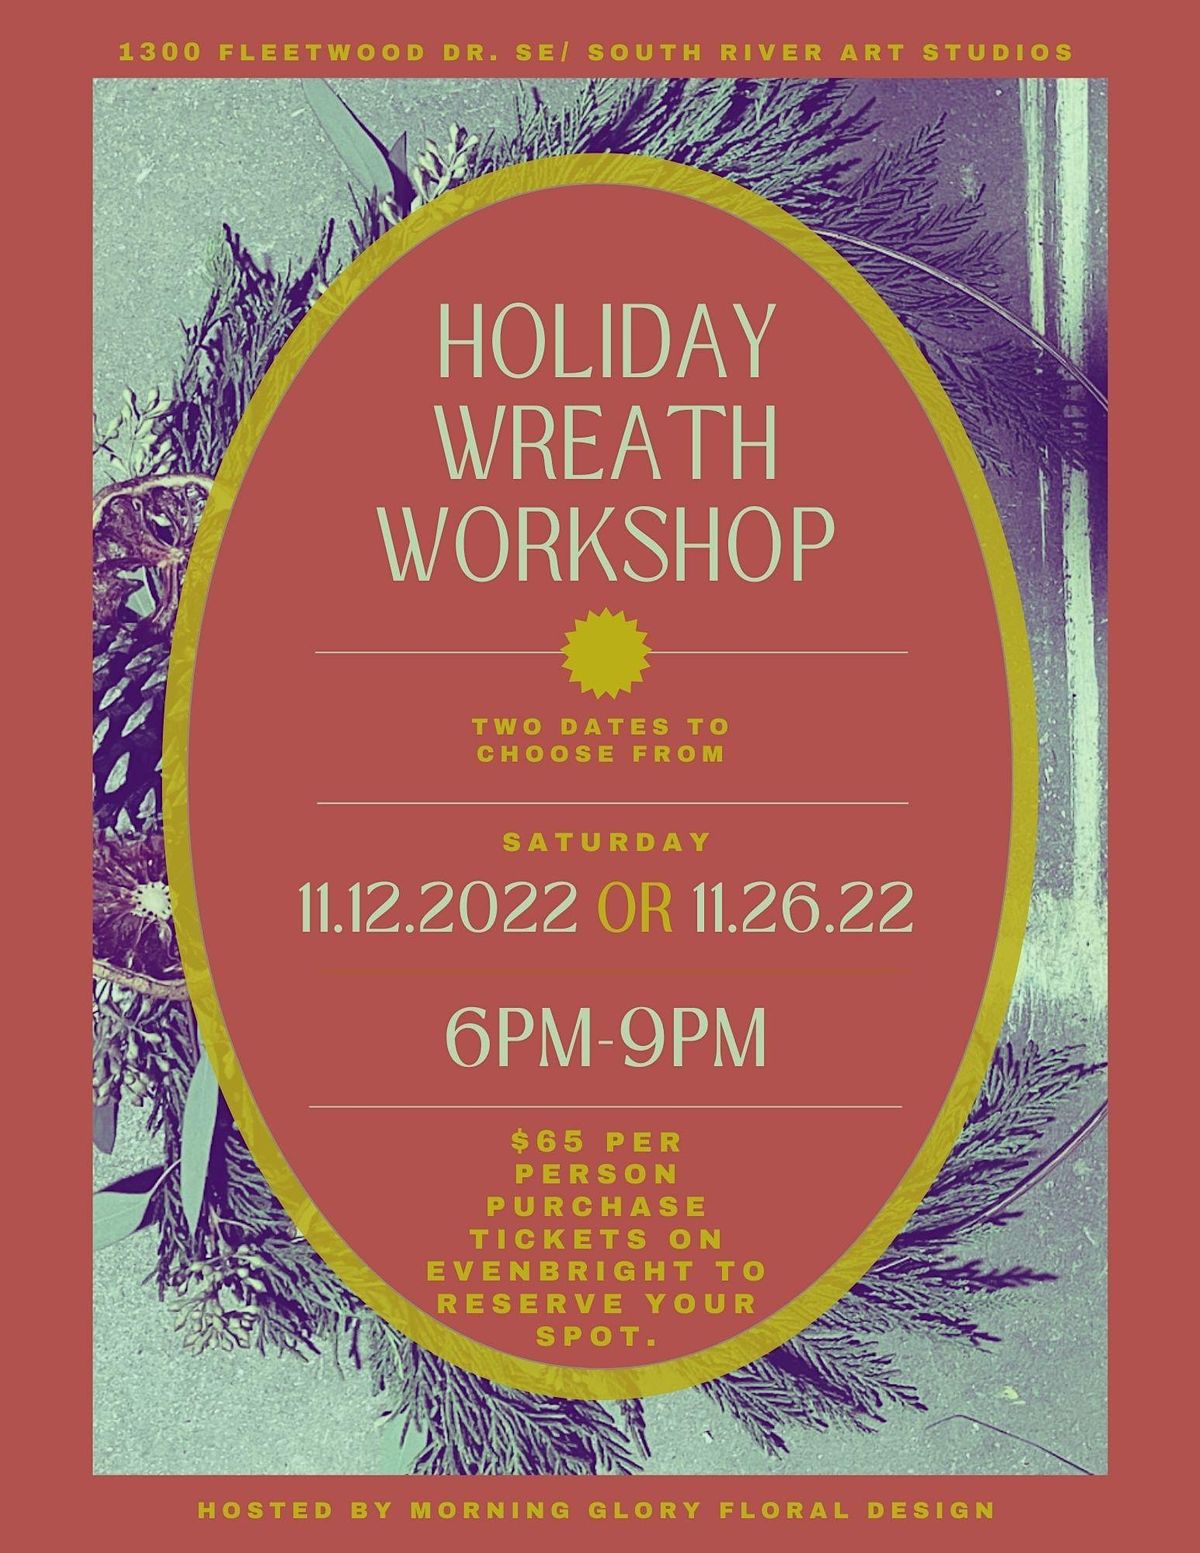 Holiday Wreath Making Class